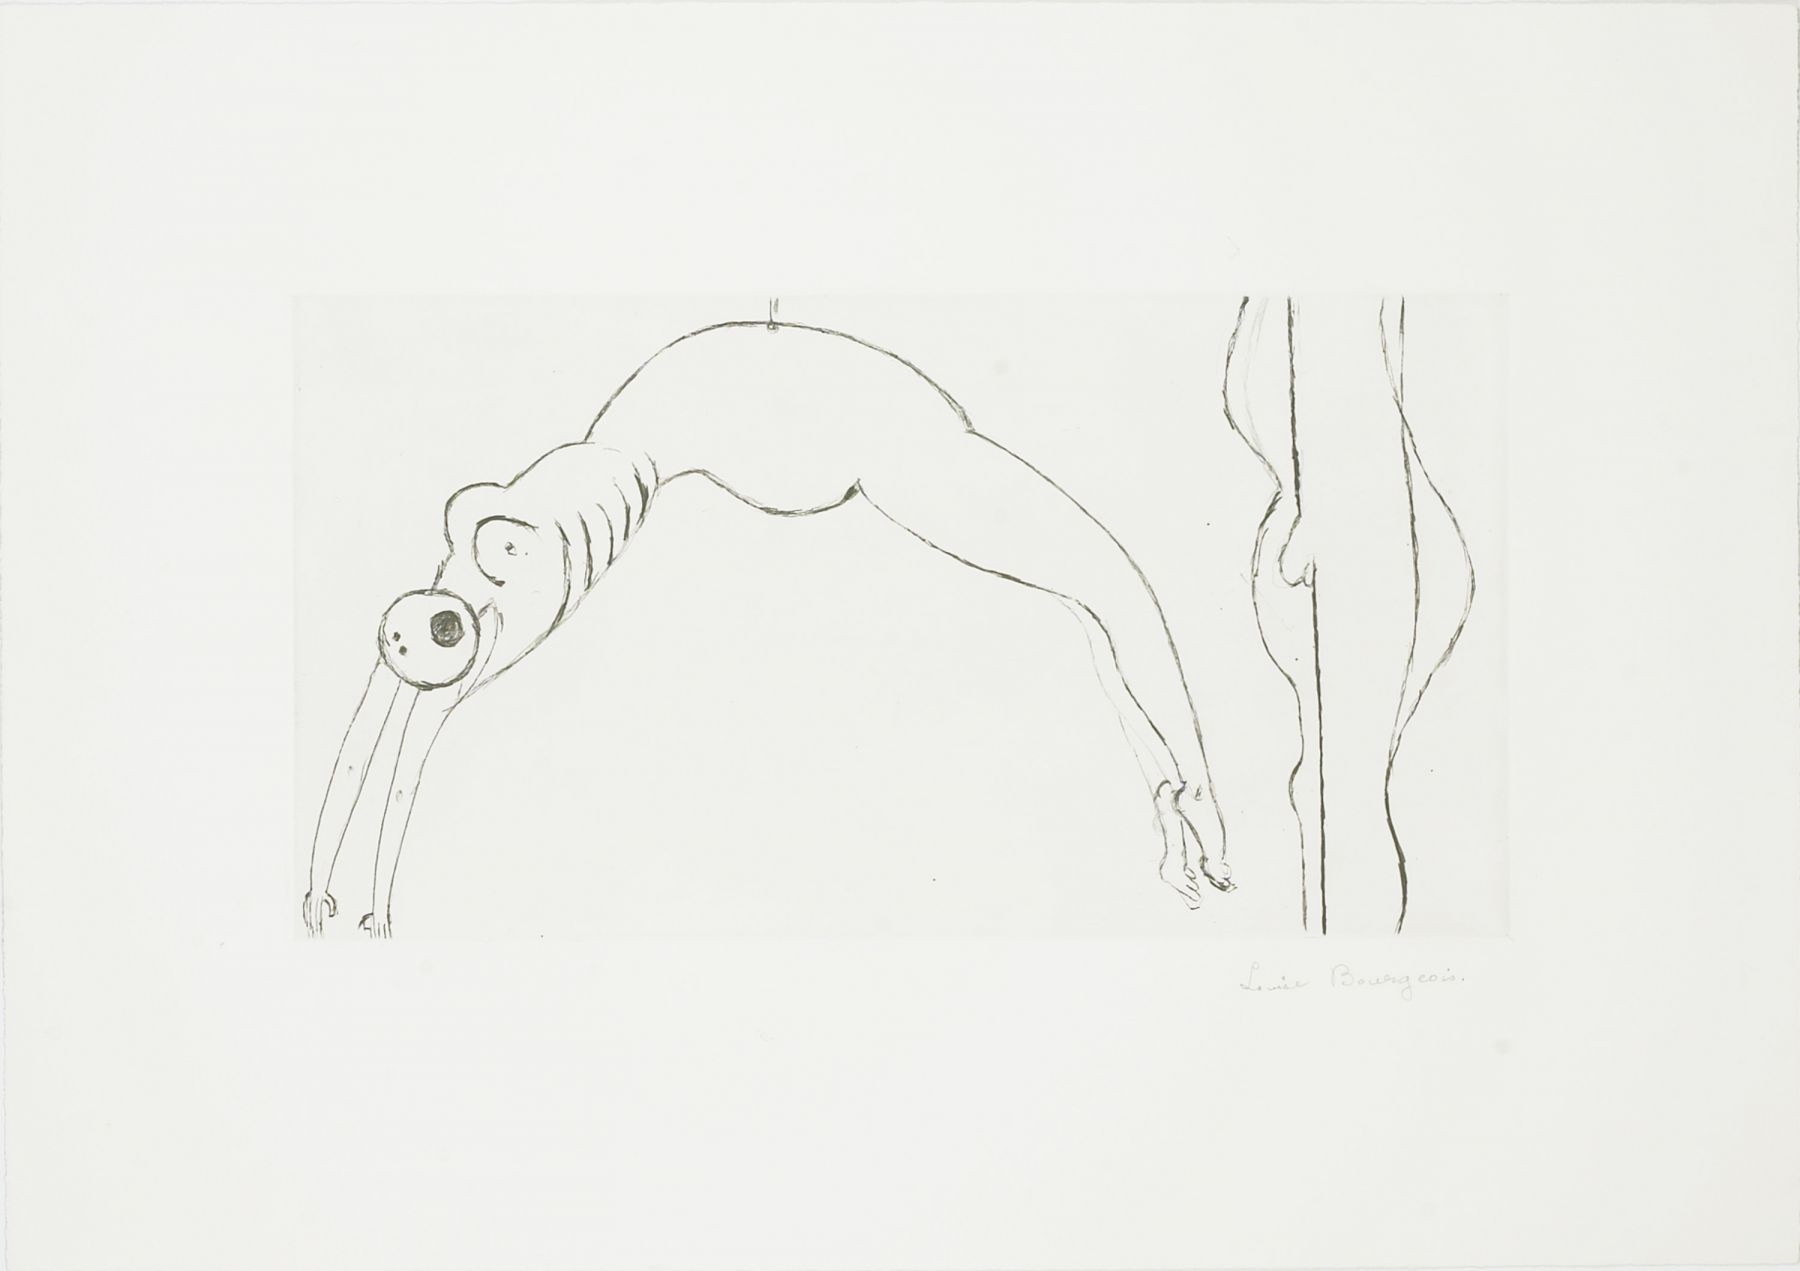 Louise Bourgeois
Arched Figure, 1993
Drypoint
15 5/8 x 22 inches (39.69 x 55.88 cm)
Edition of 50 + proofs

Inquire